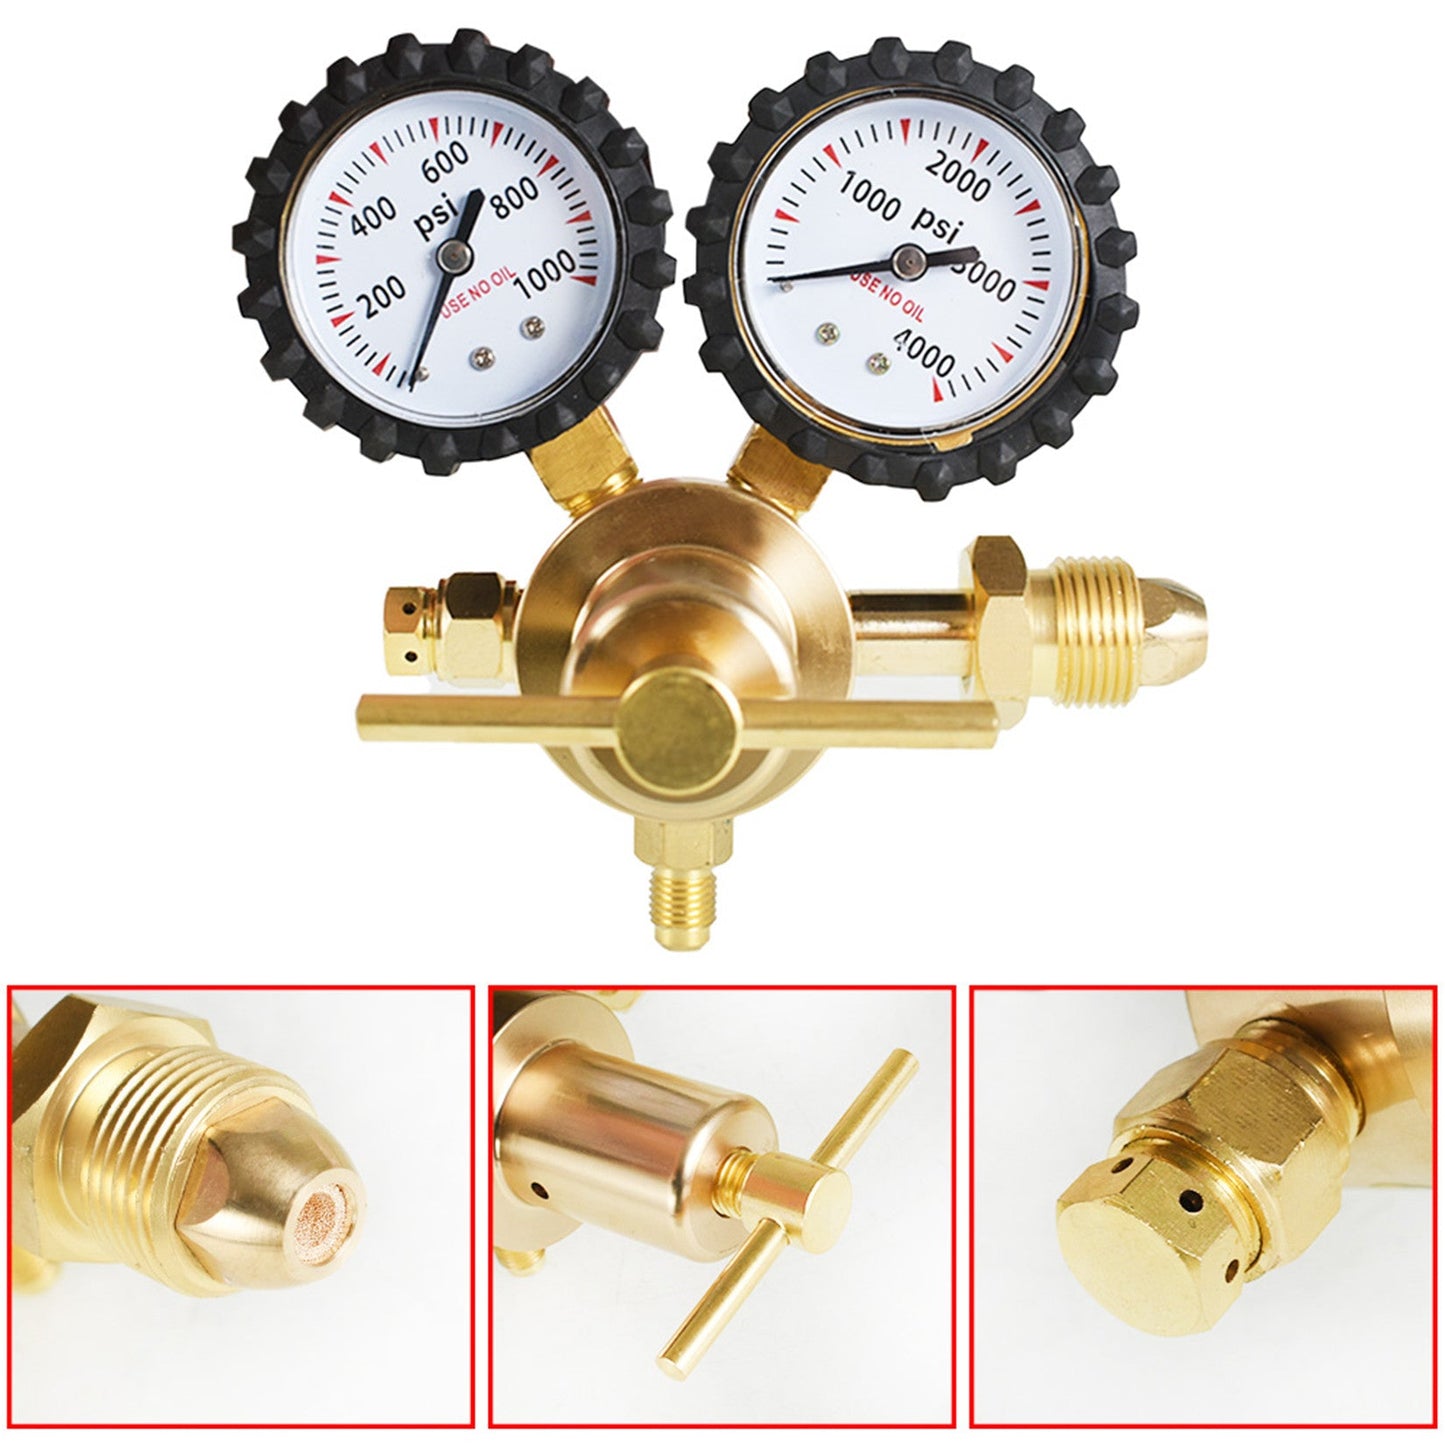 findmall  Nitrogen Regulator 0-800PSI Delivery Pressure Brass CGA580 Inlet Tank Threads 1/4 Inch Male Flare Outlet Connection - UNF7/16-20 Outlet Threads Heavy-Duty Handle Self-reseating Relief Valve FINDMALLPARTS